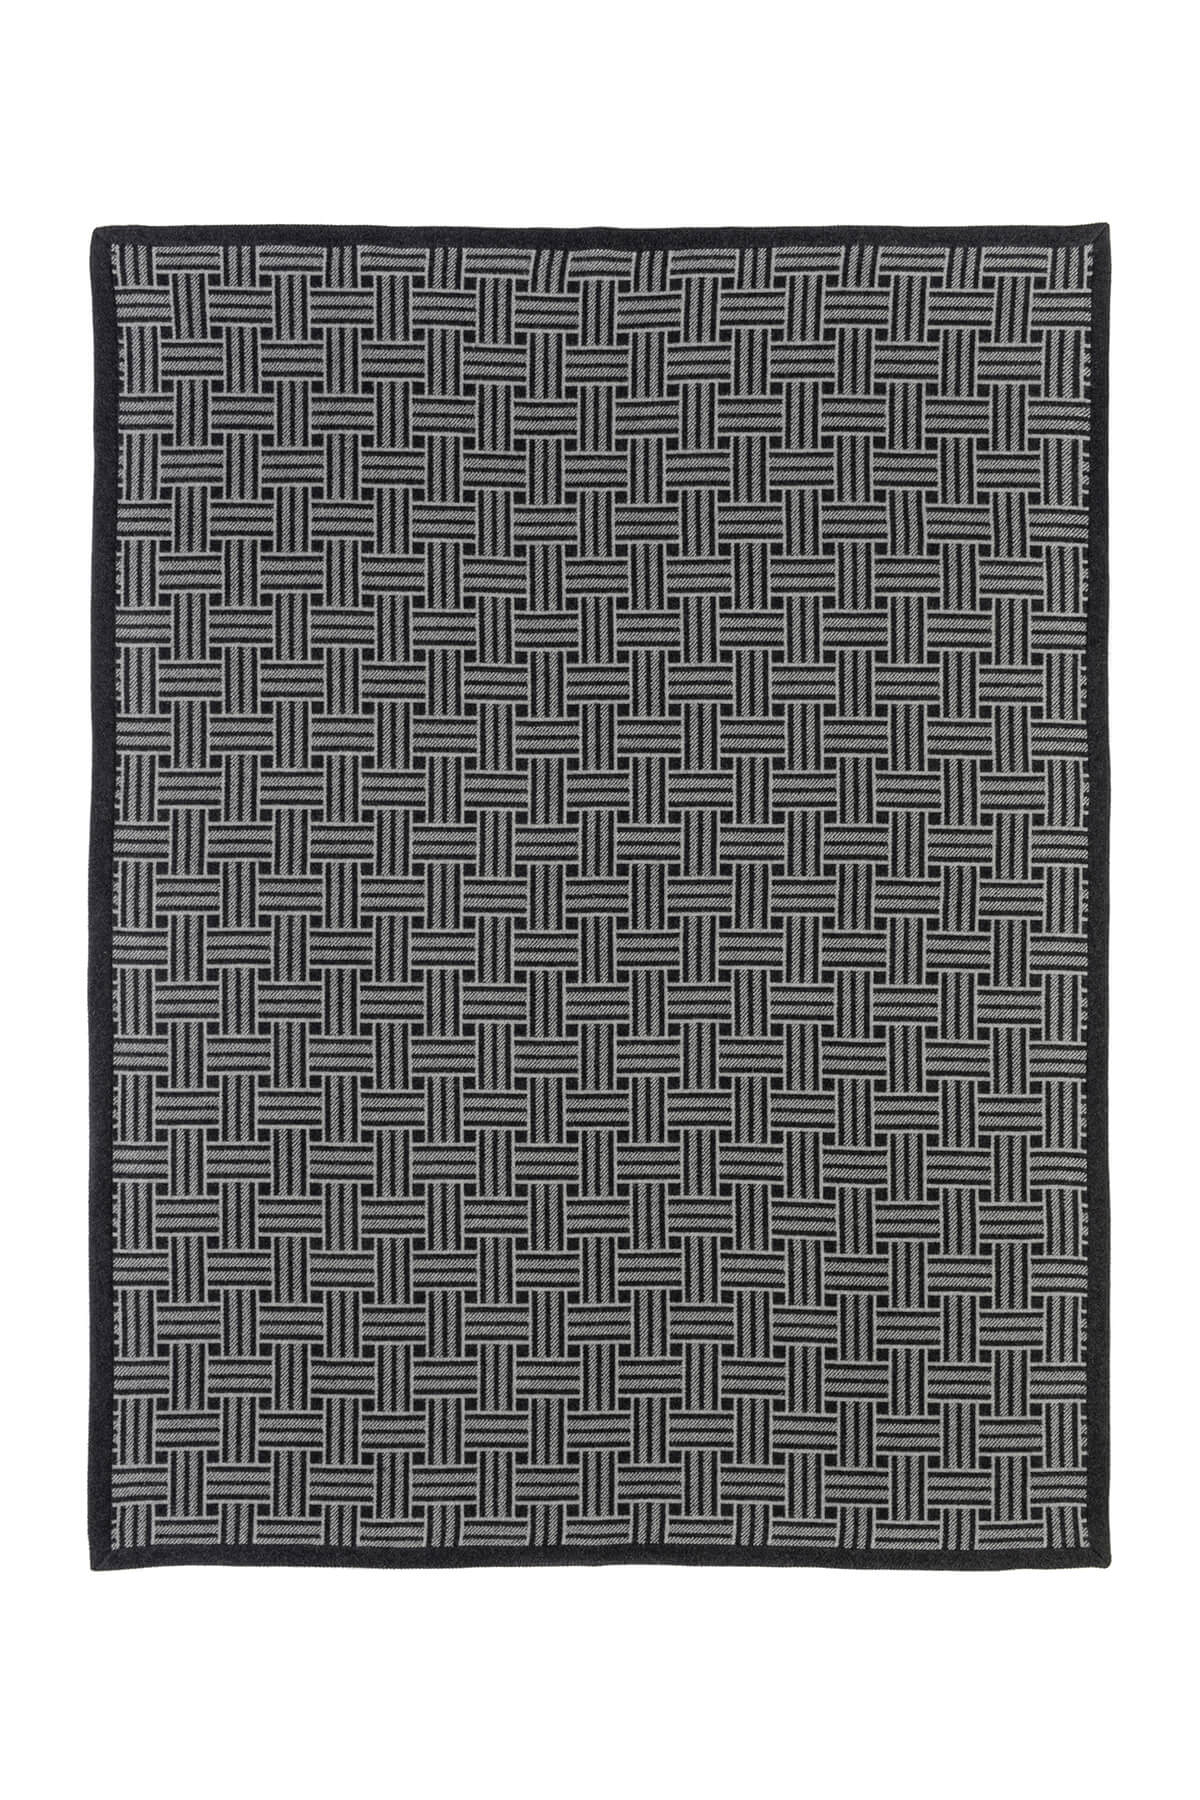 Johnstons of Elgin’s Charcoal & Grey Basket Weave Throw on white background TB000470RU6998ONE